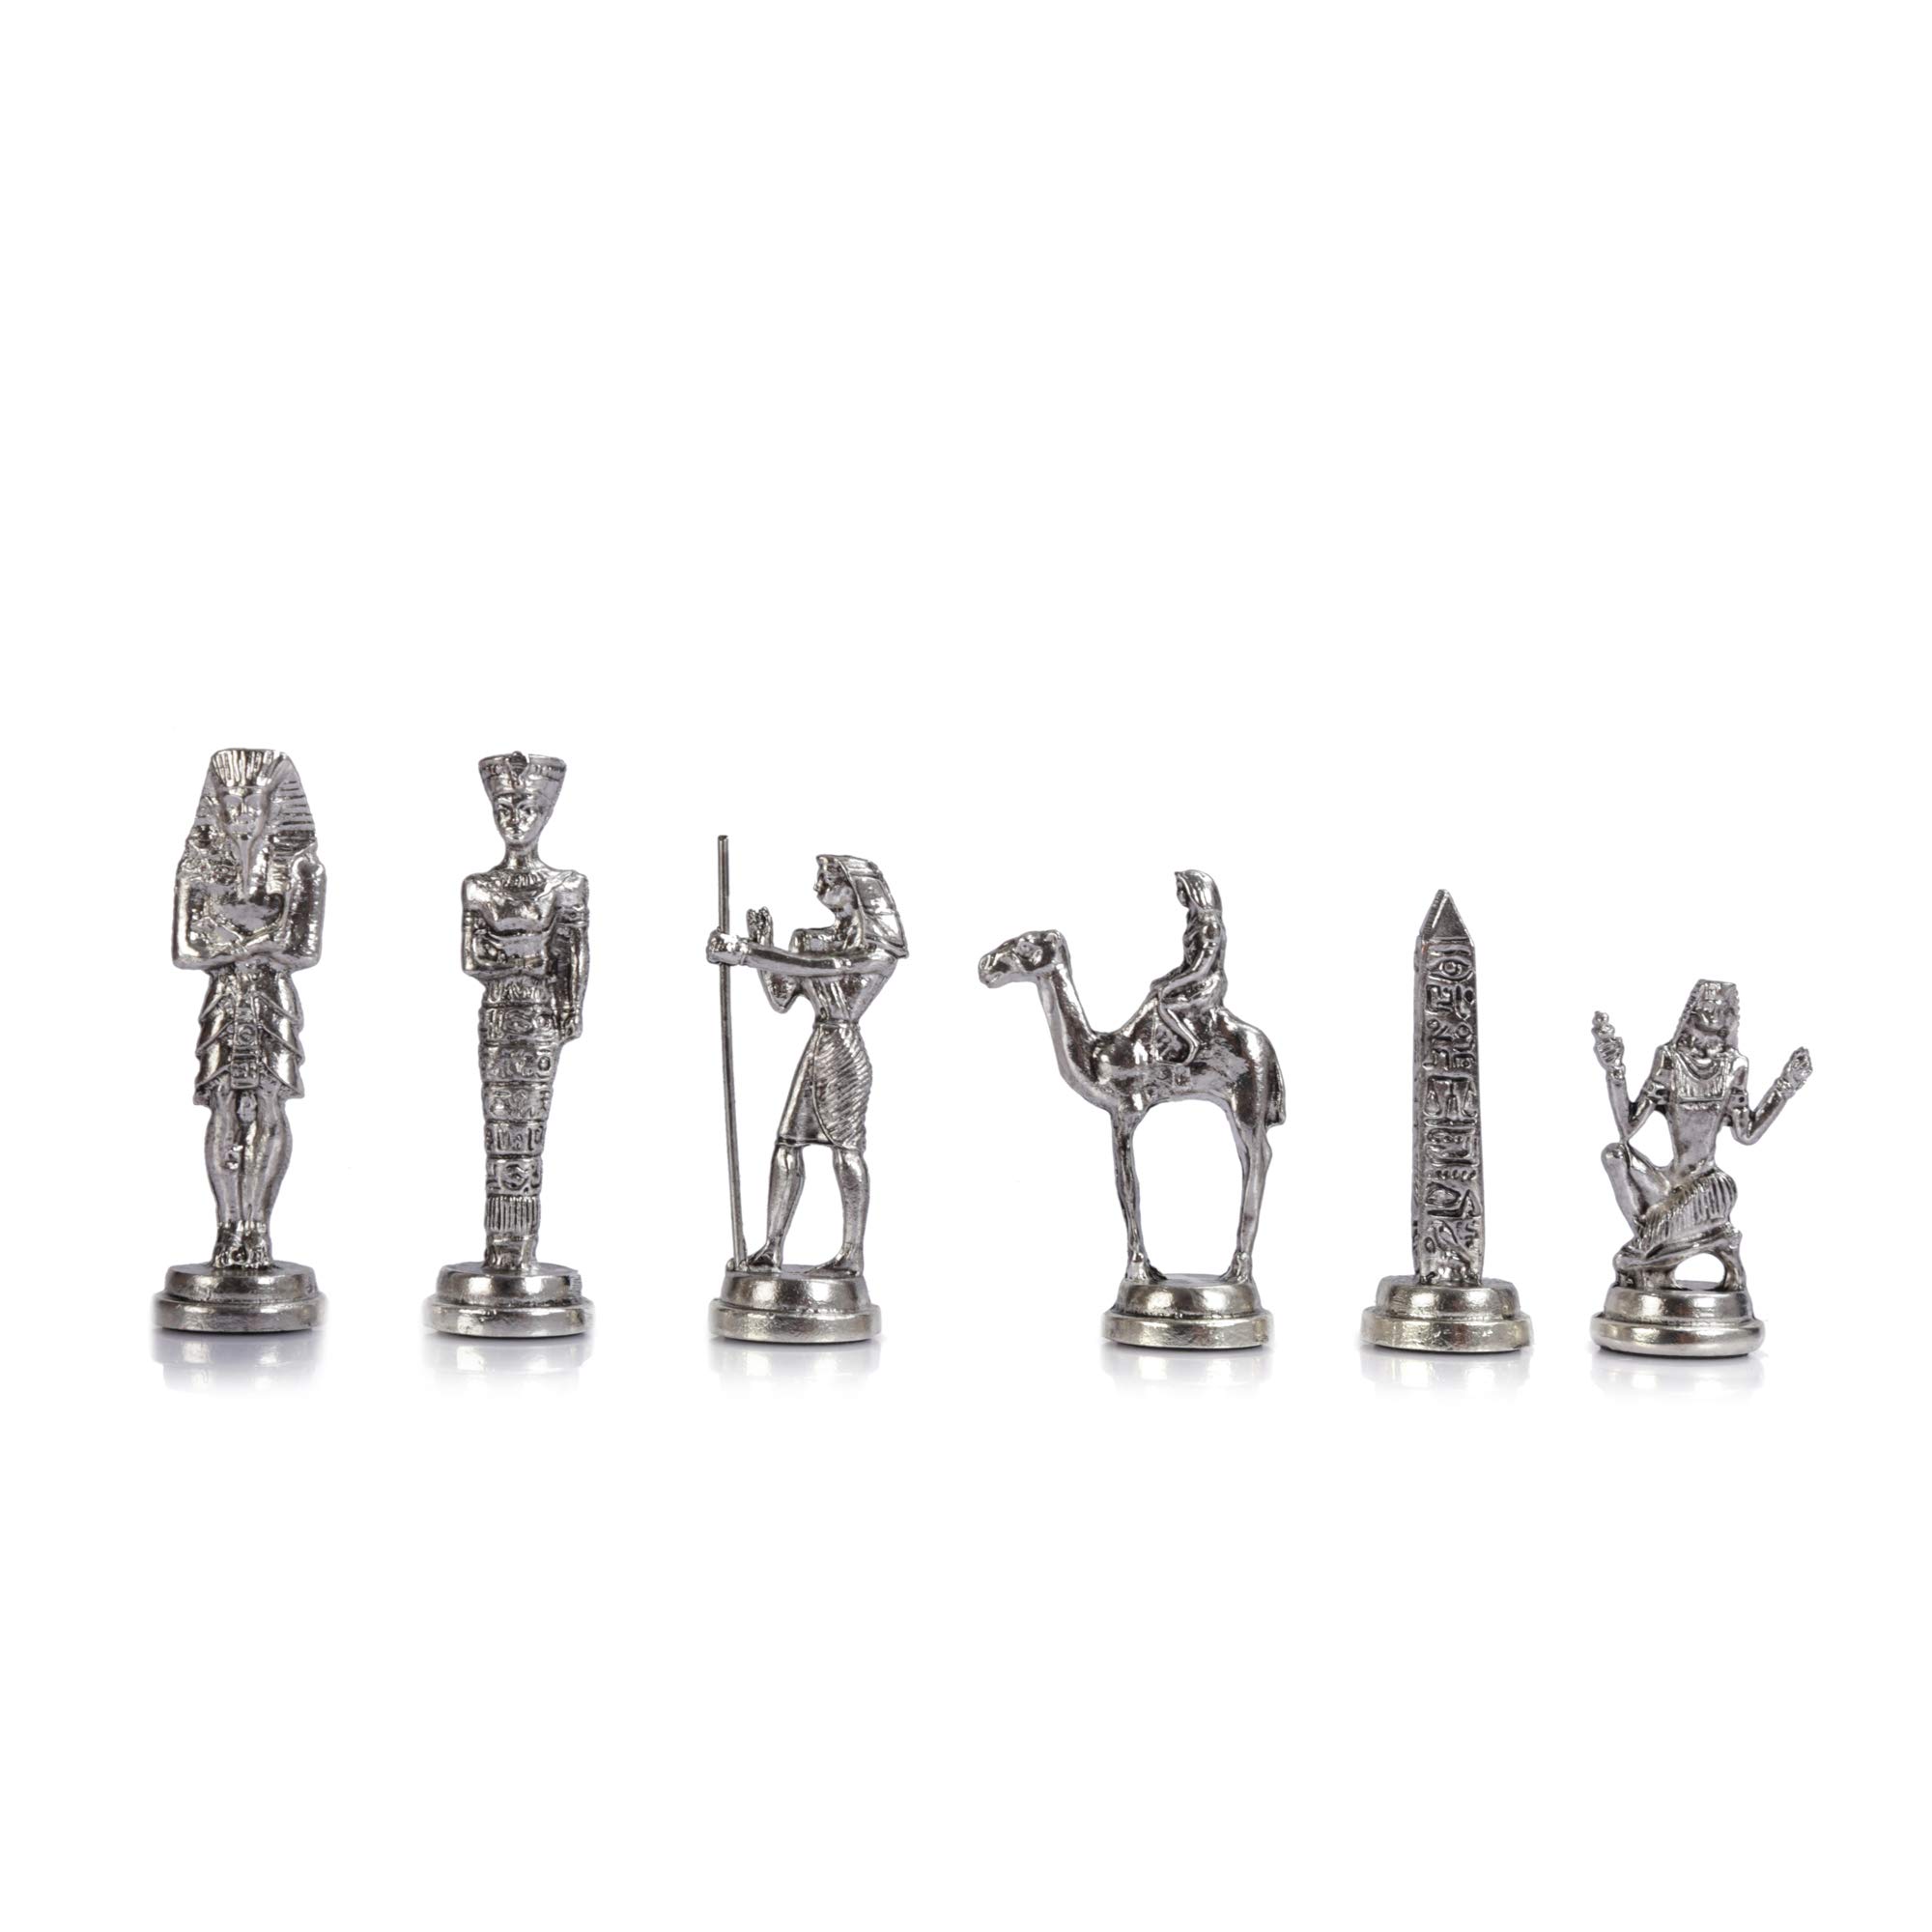 (Without Board) Historical Handmade Ancient Egypt Pharaoh Figures Metal Chess Pieces Medium Size King 3.5 inc (Only Pieces)